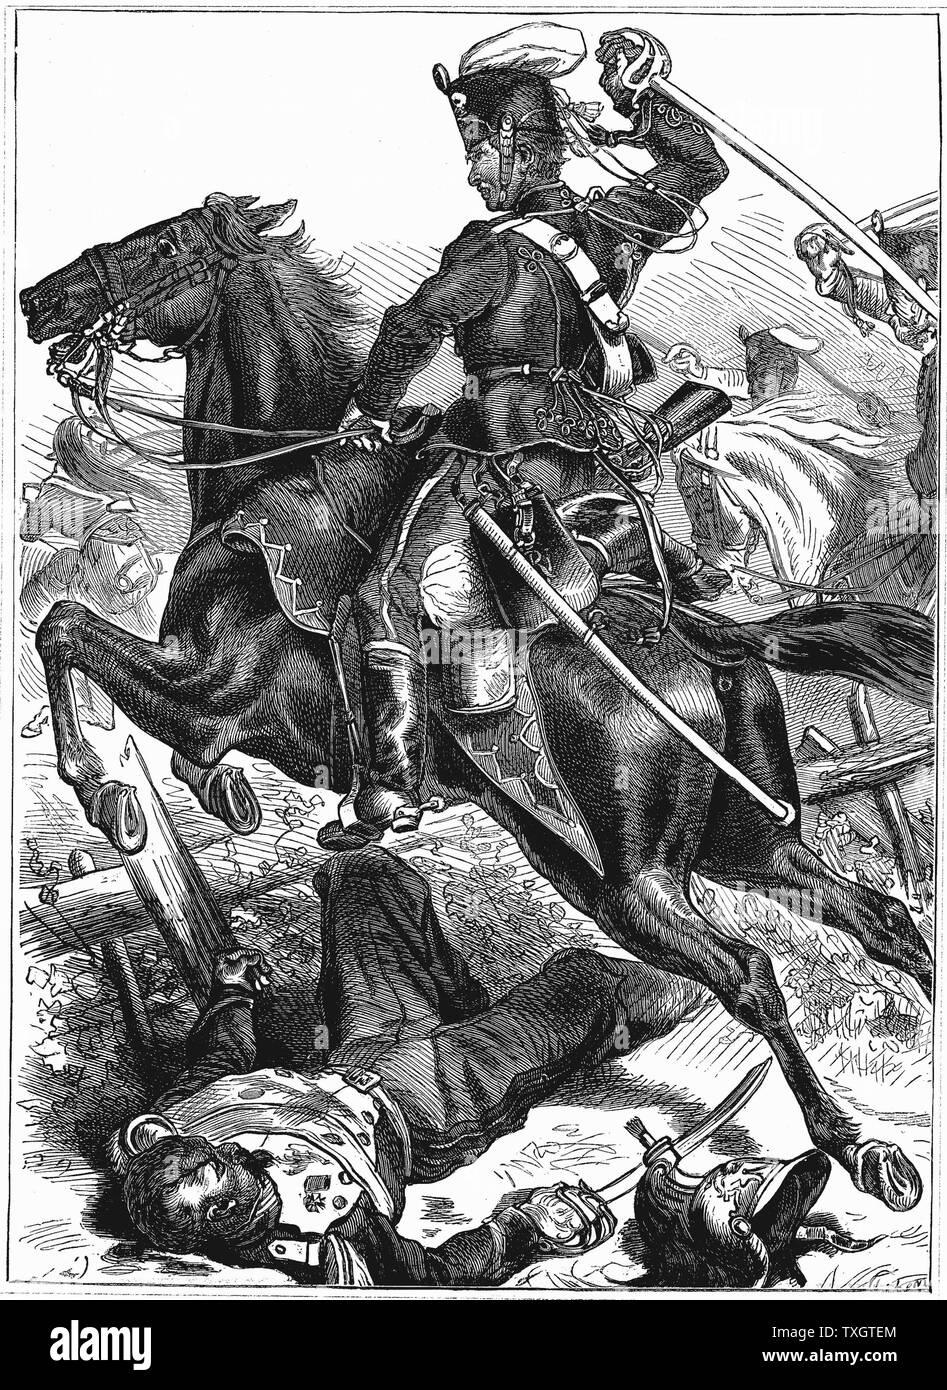 Franco-Prussian War 1870-1871: Prussian Hussar charging with sword drawn Wood engraving Stock Photo